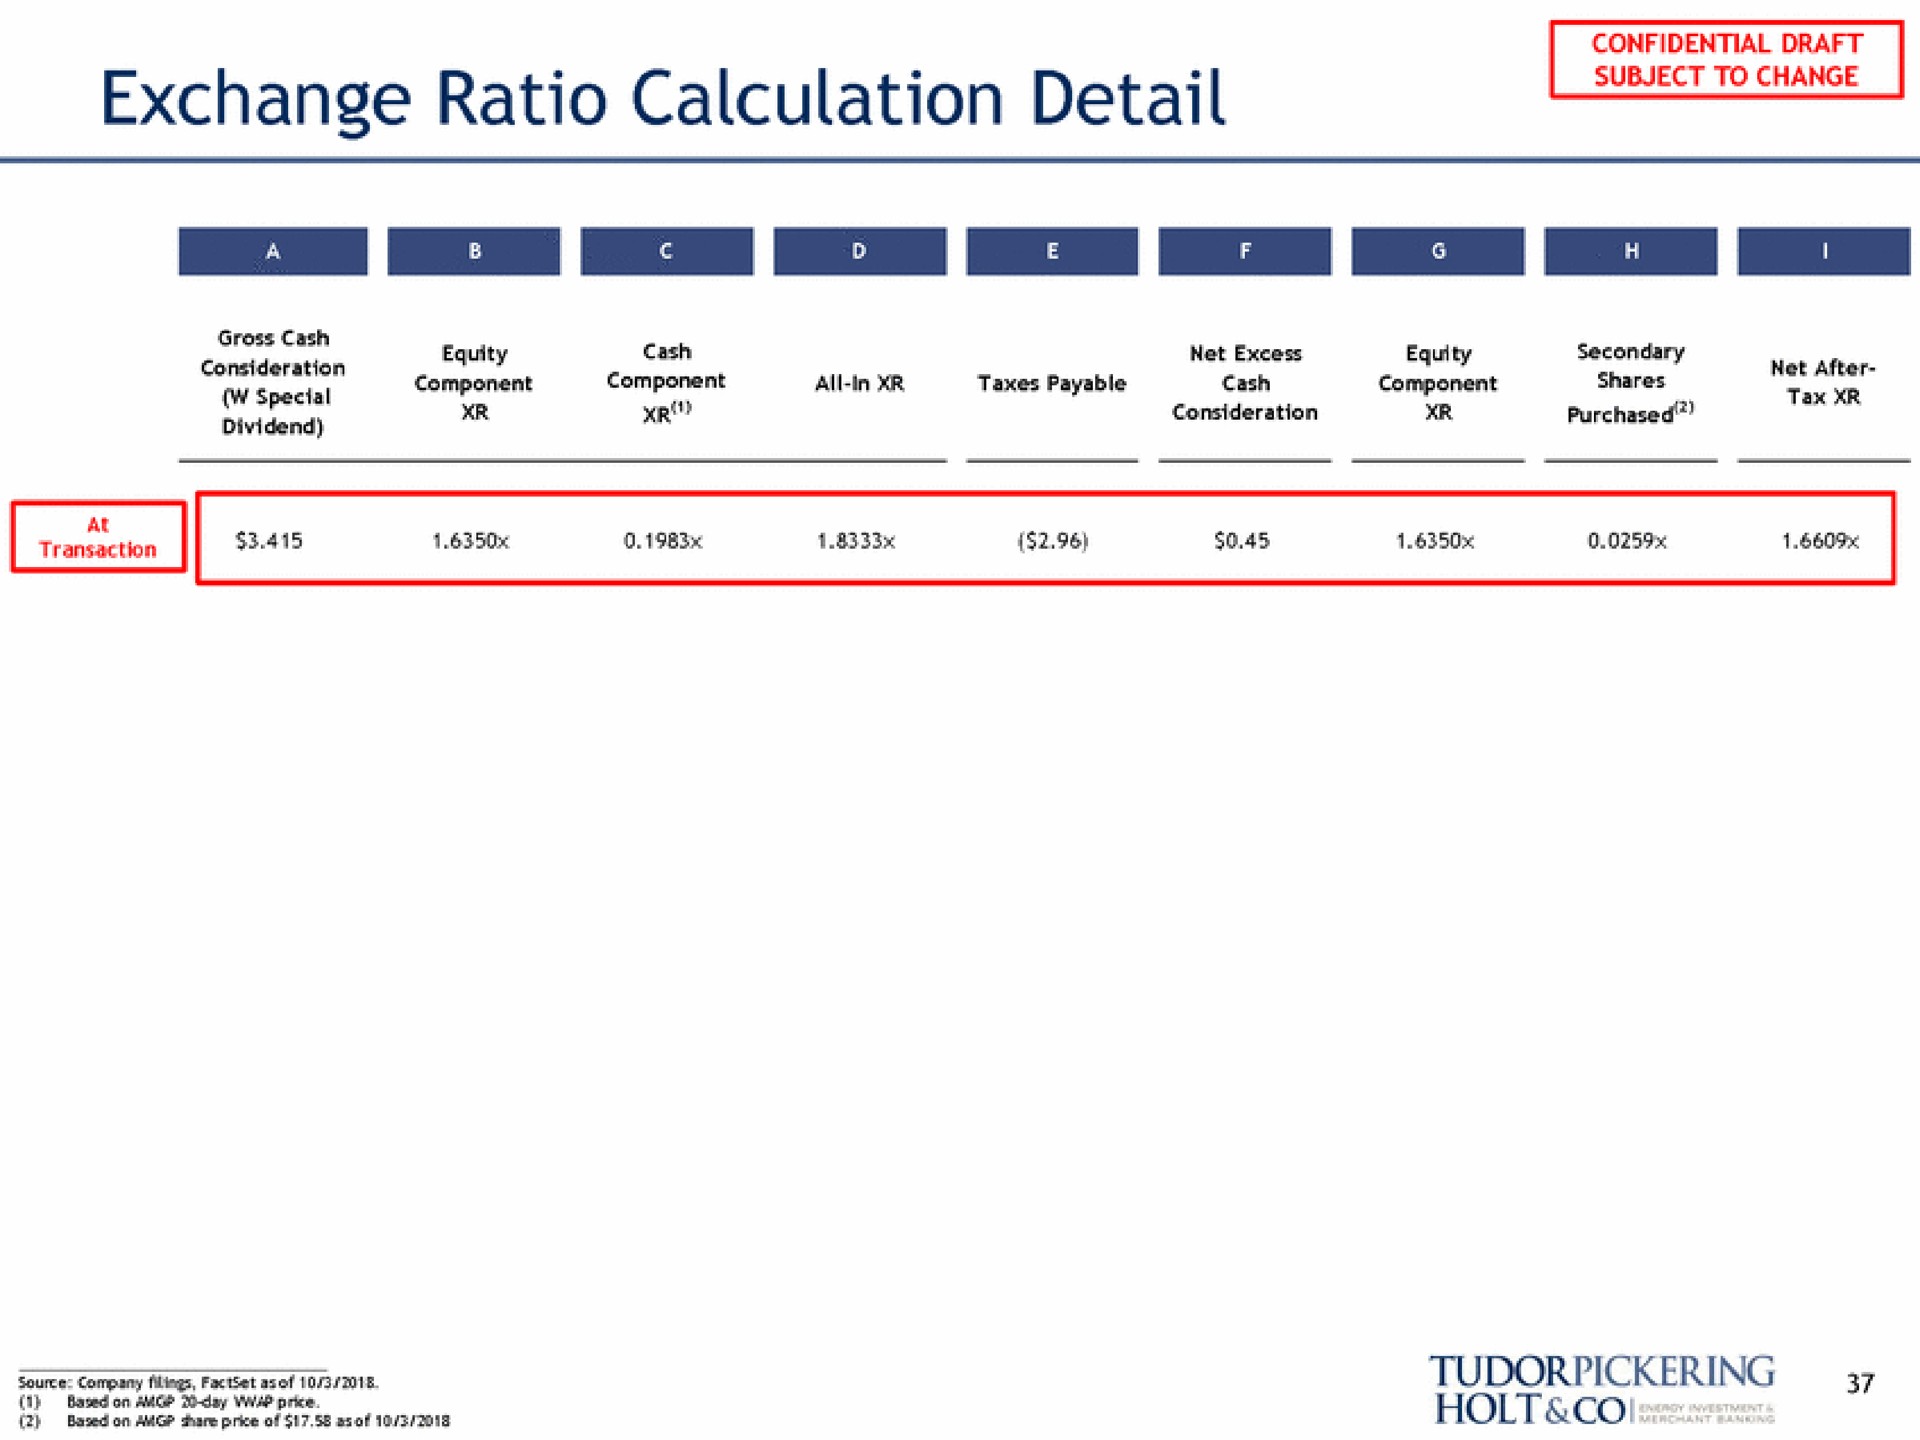 exchange ratio calculation detail be source company of | Tudor, Pickering, Holt & Co